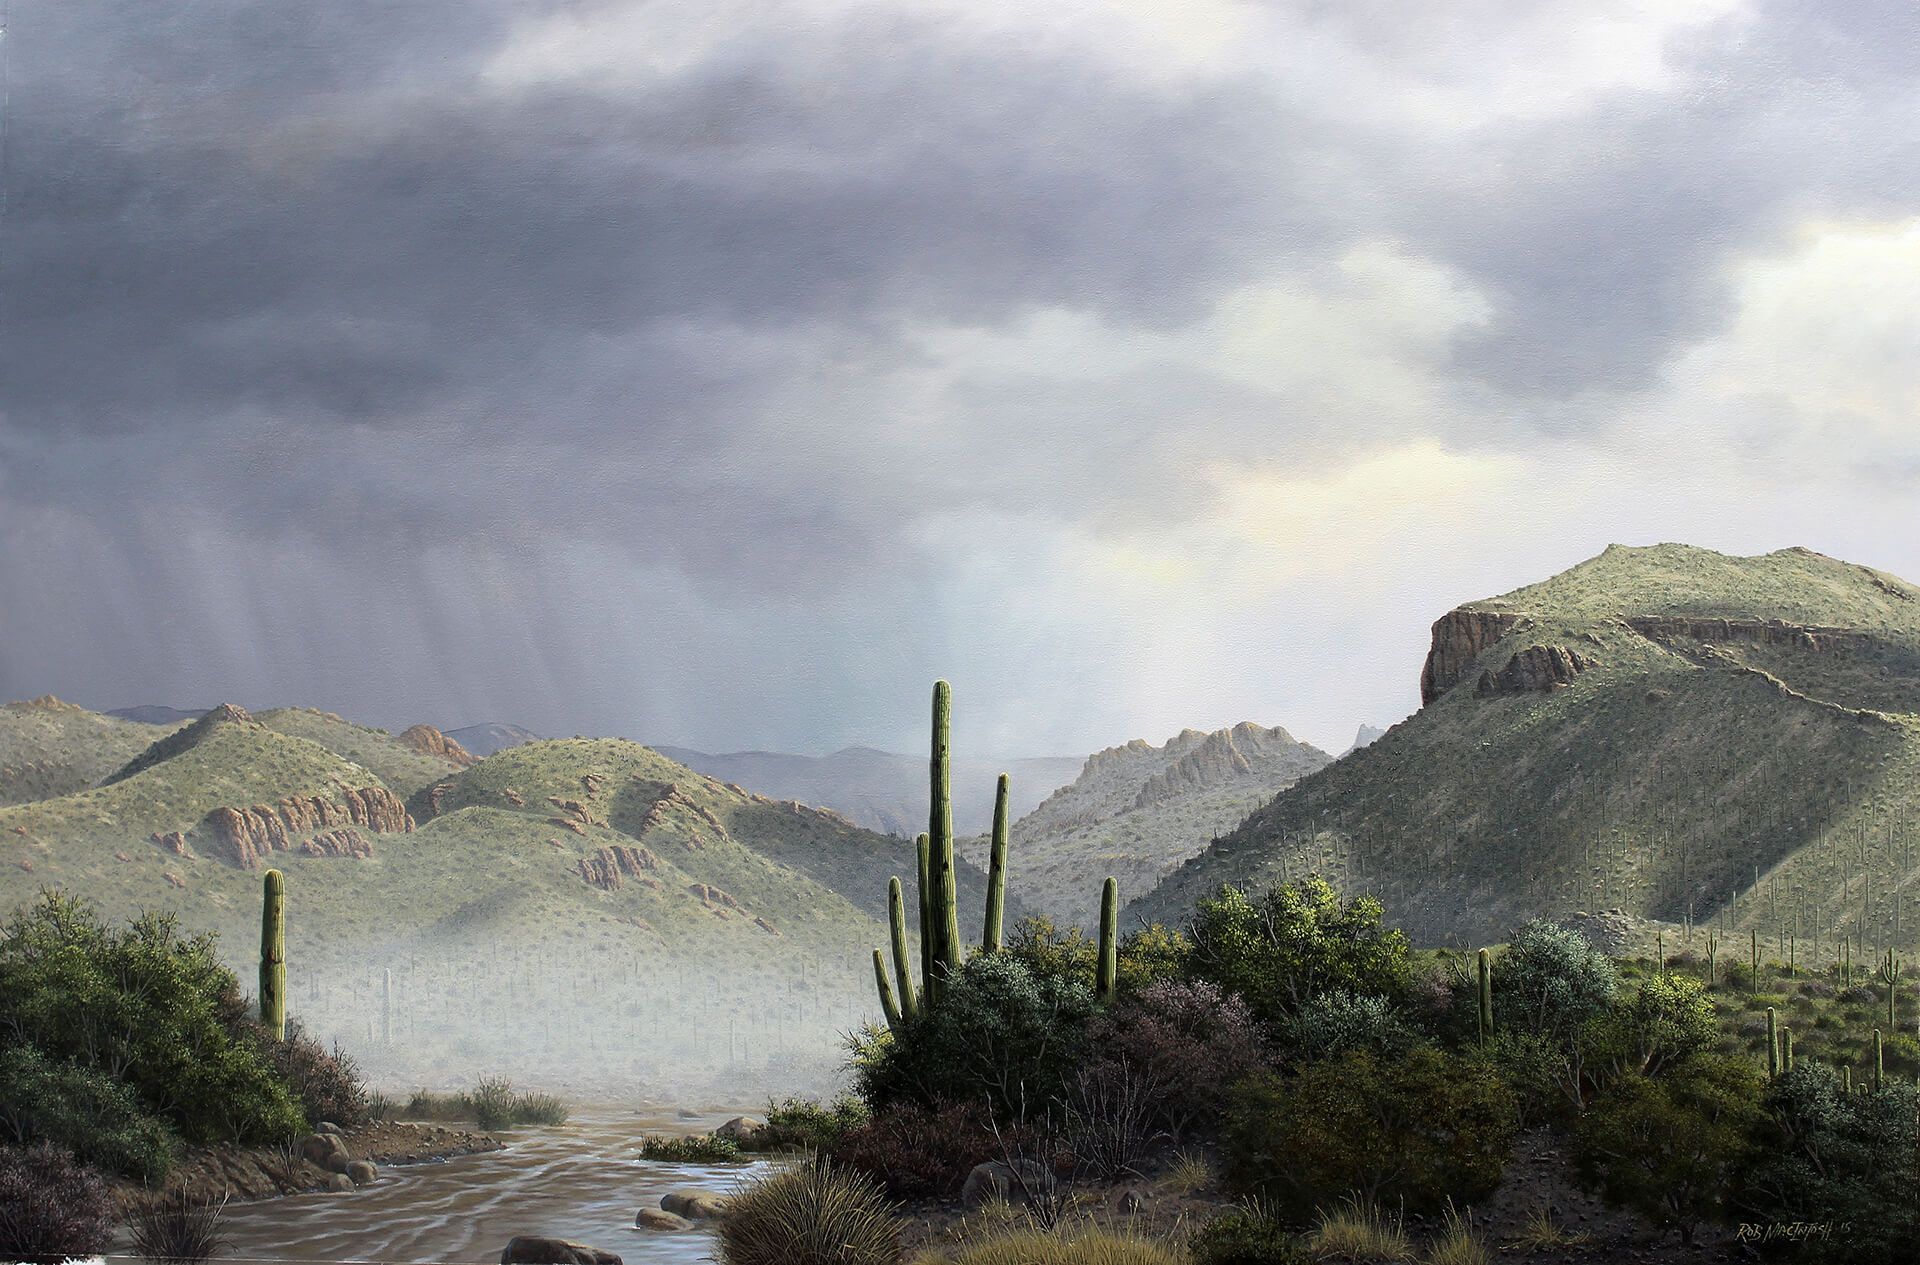 Photorealistic painting of the Catalina Mountains after a storm